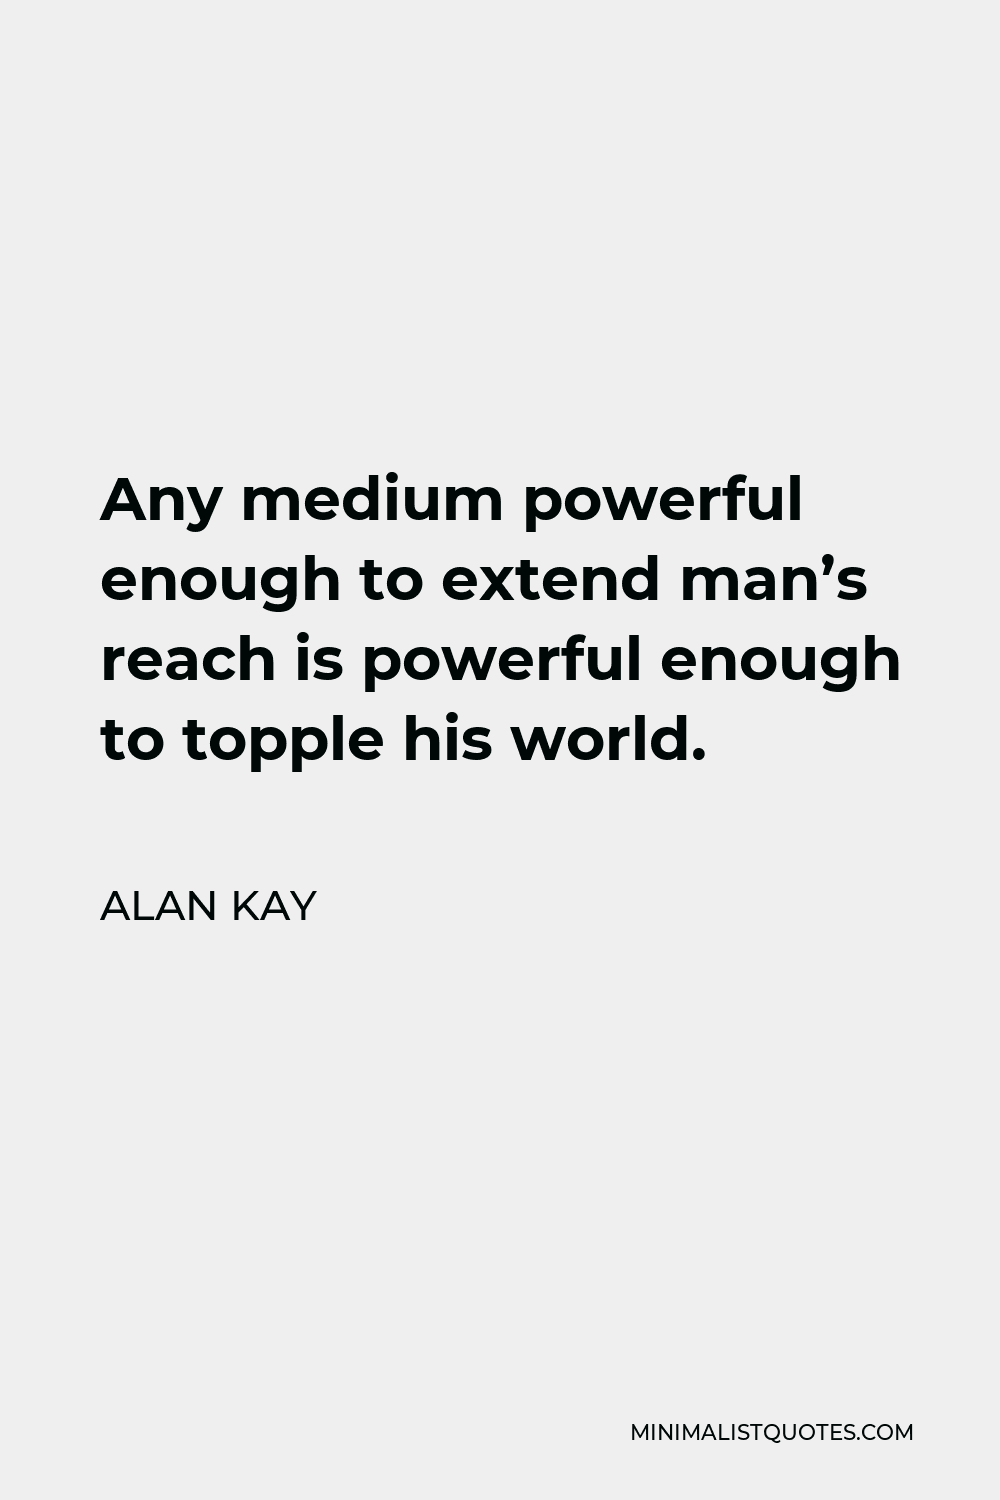 Alan Kay Quote - Any medium powerful enough to extend man’s reach is powerful enough to topple his world.